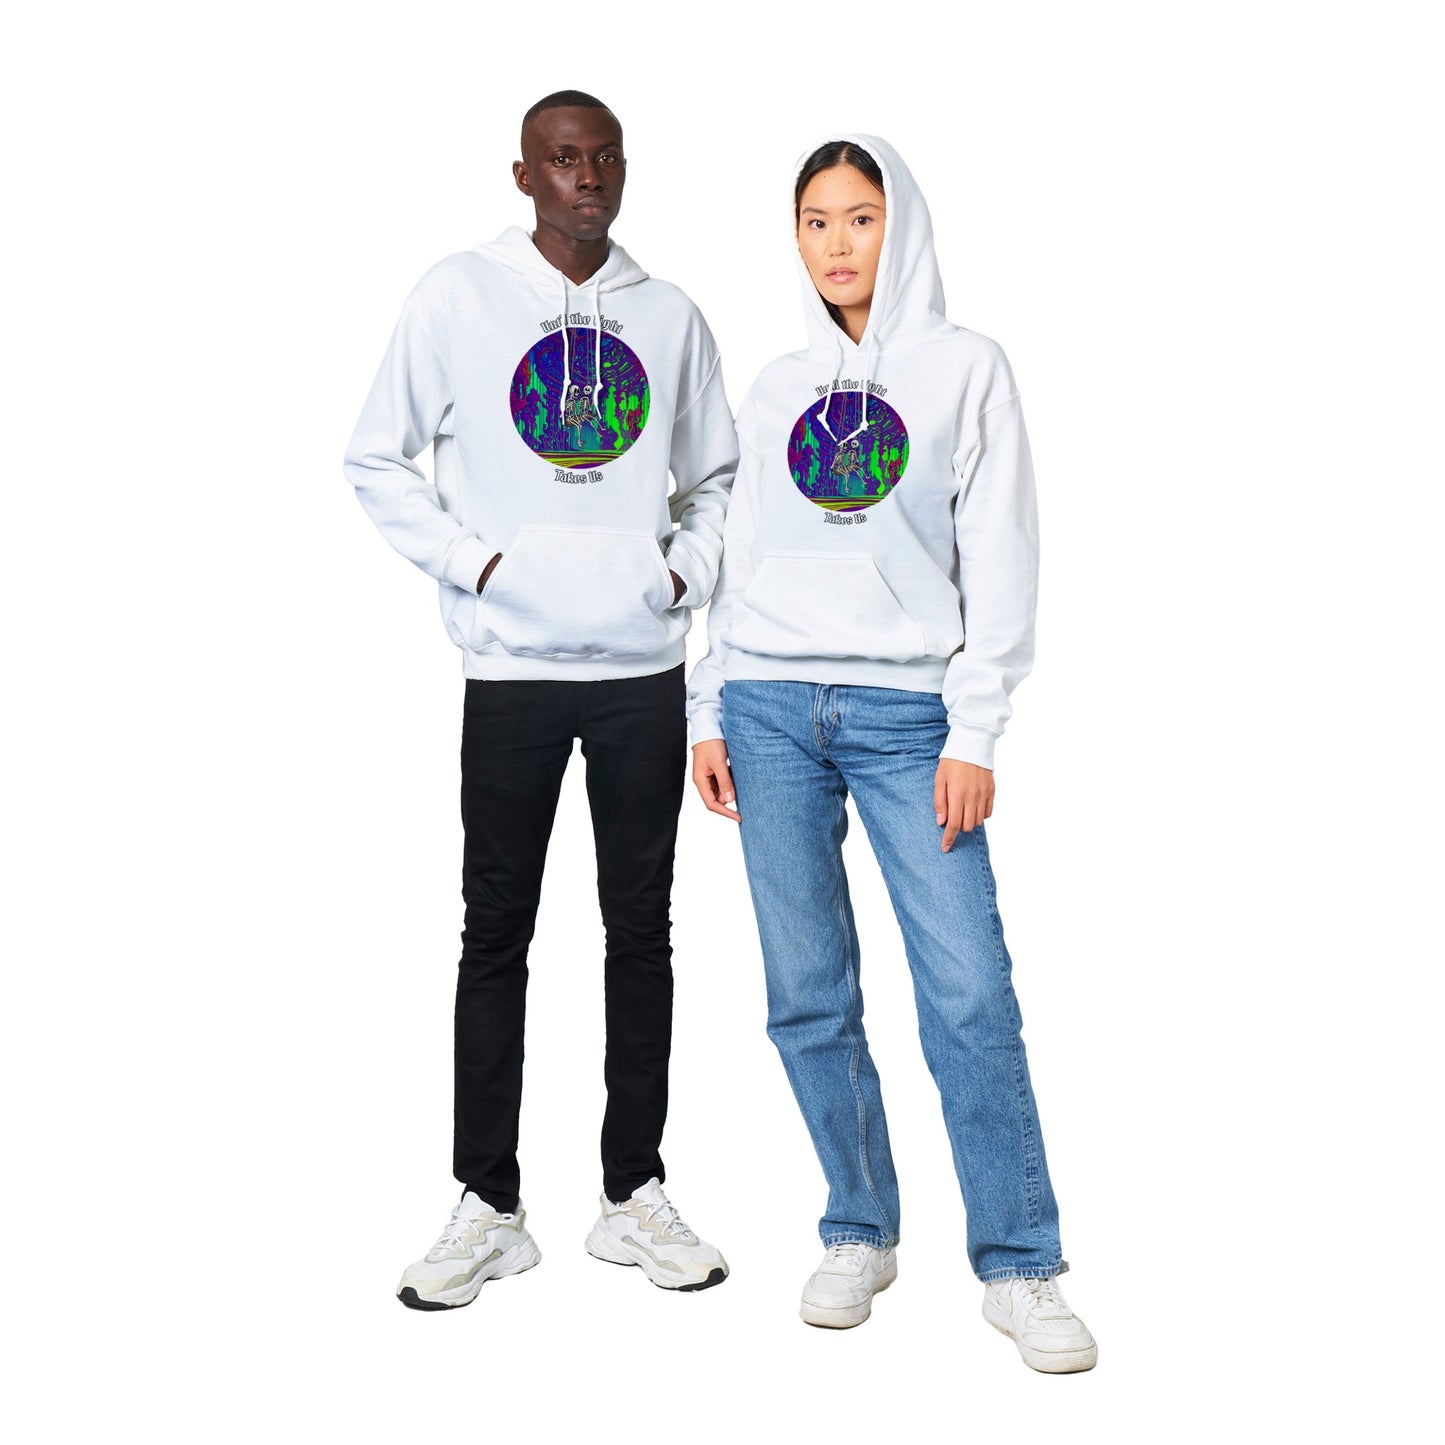 Bones Collection - Trippy - Classic Unisex Pullover Hoodie